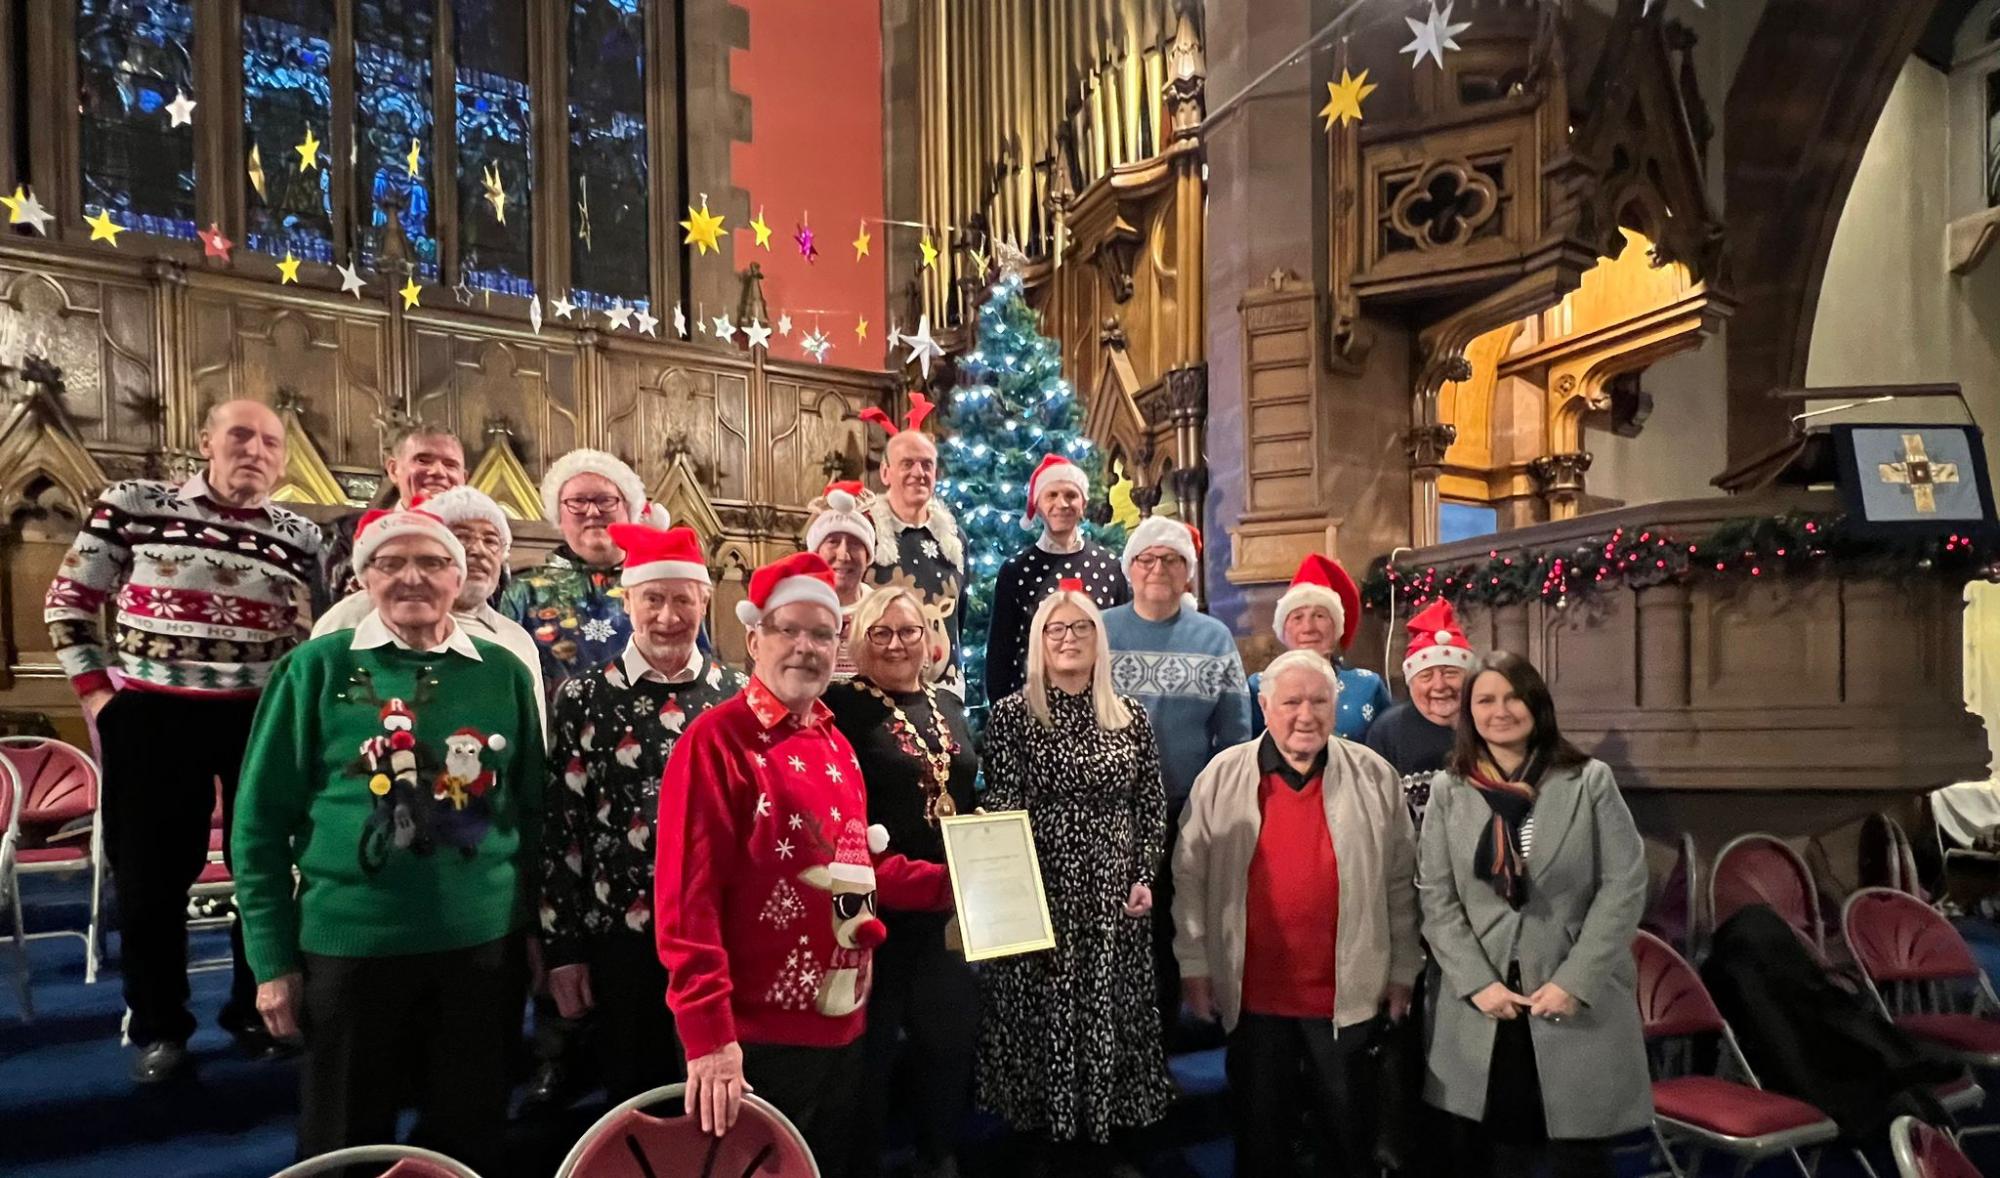 Kirkintilloch Male Voice Choir with guests in St. Mary's Parish Church